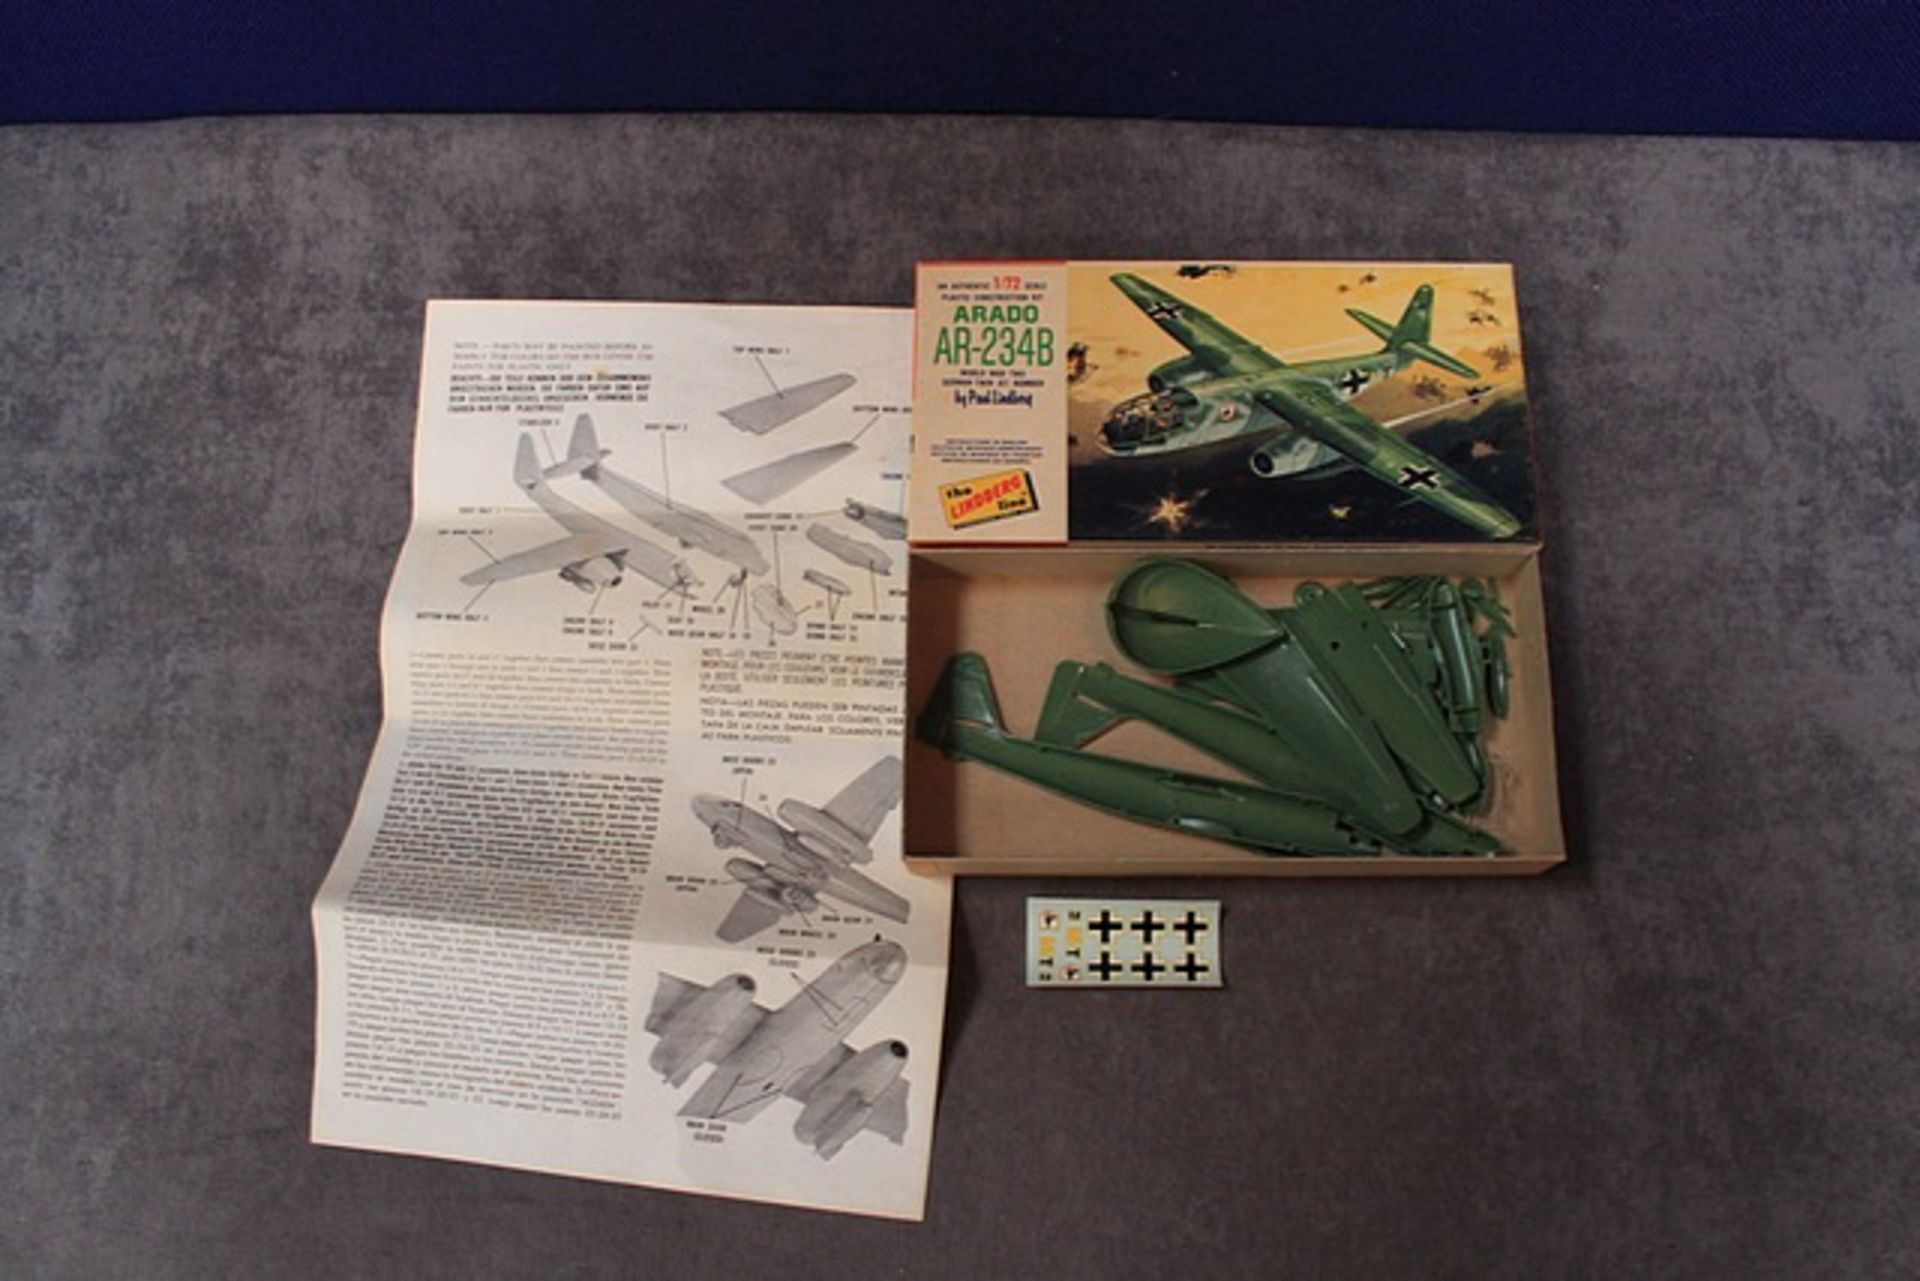 The Lindberg Kit No 439:50 Arado AR-234R Off Sprues With Instructions In Box - Image 2 of 2